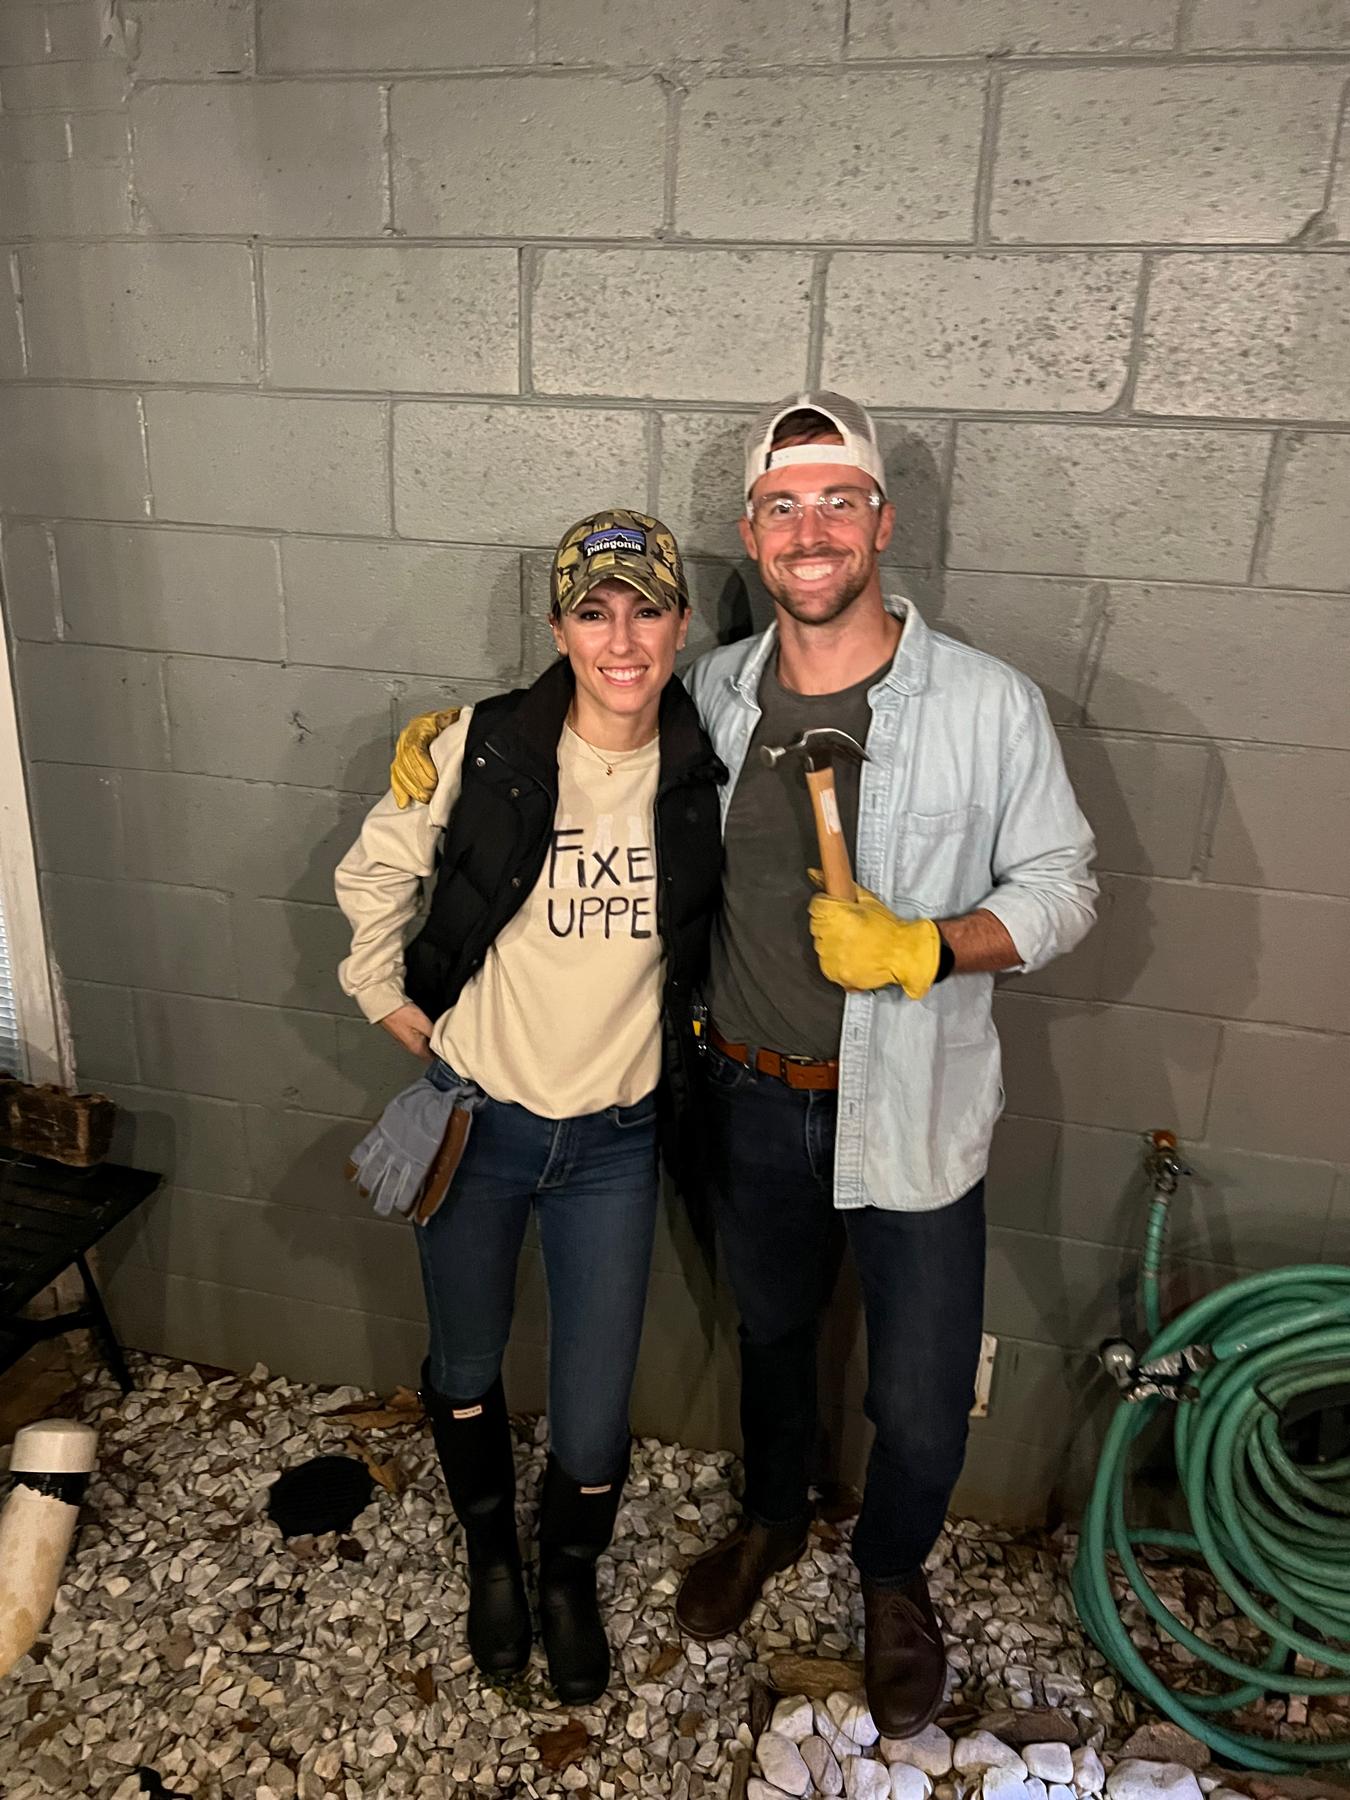 Halloween as Chip and Joanna Gaines after A LOT of real life remodeling of our home!